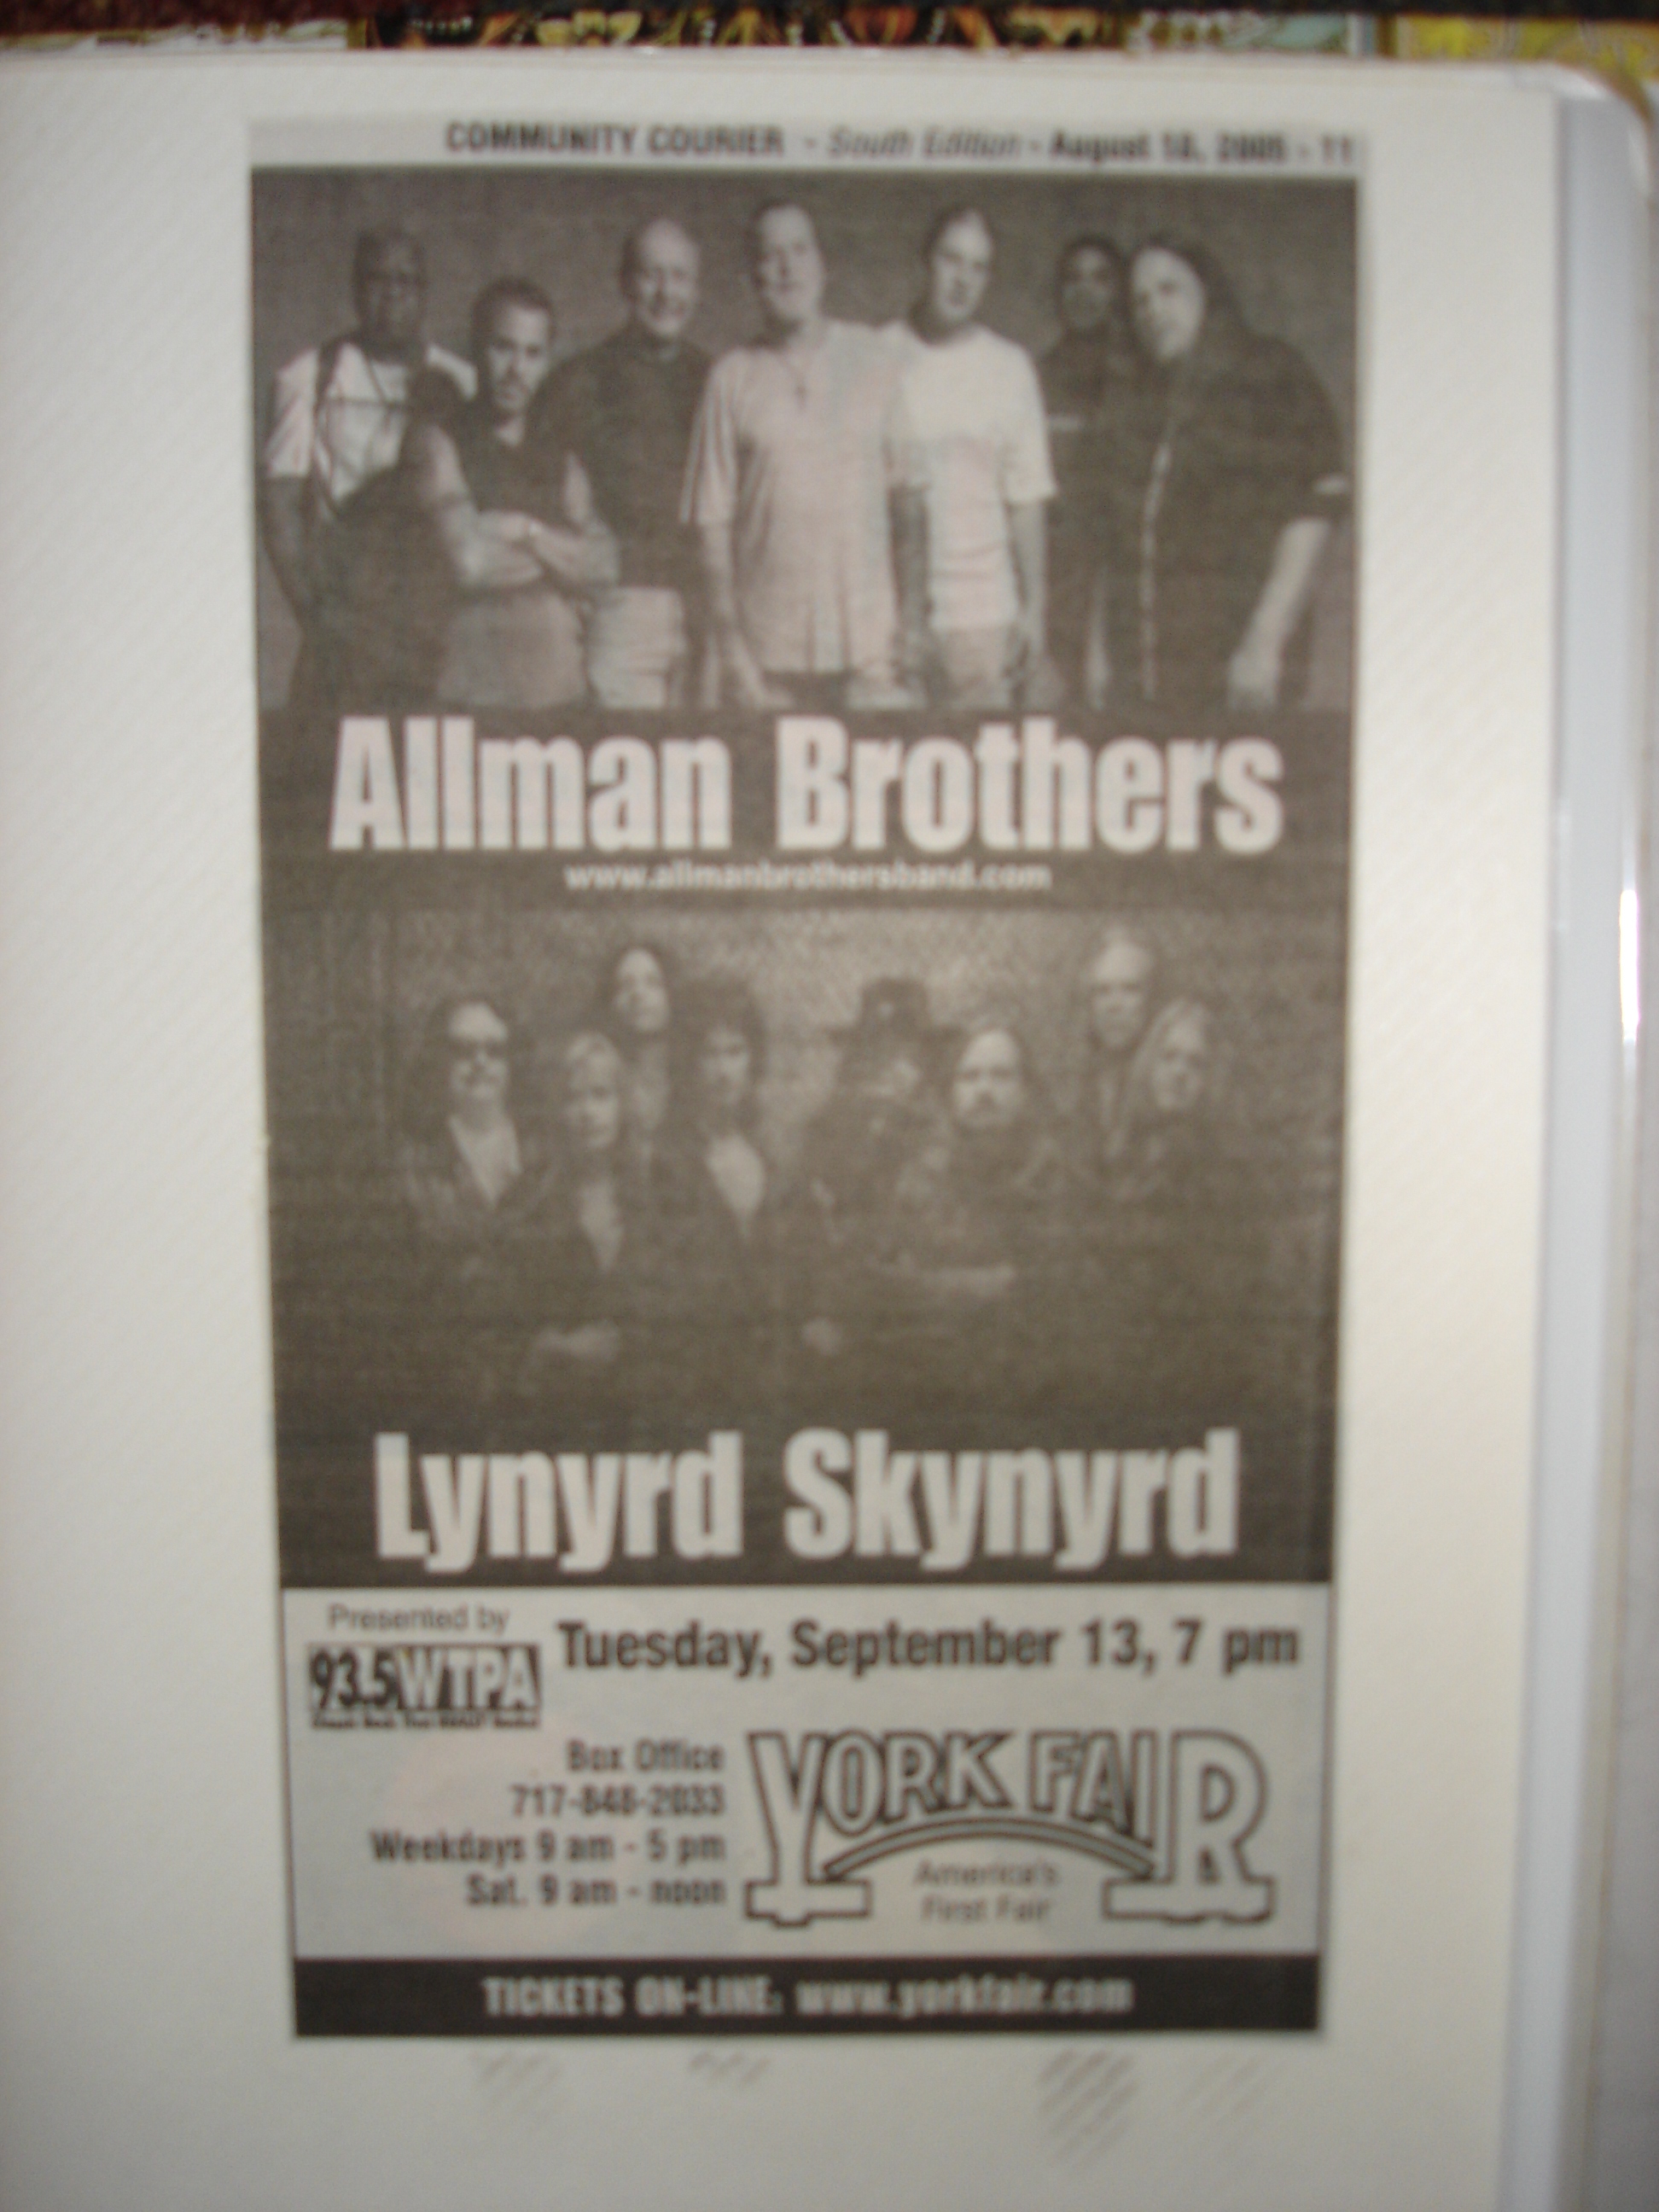 Now that Skynyrd's not playing this show that sort of makes this collectible!